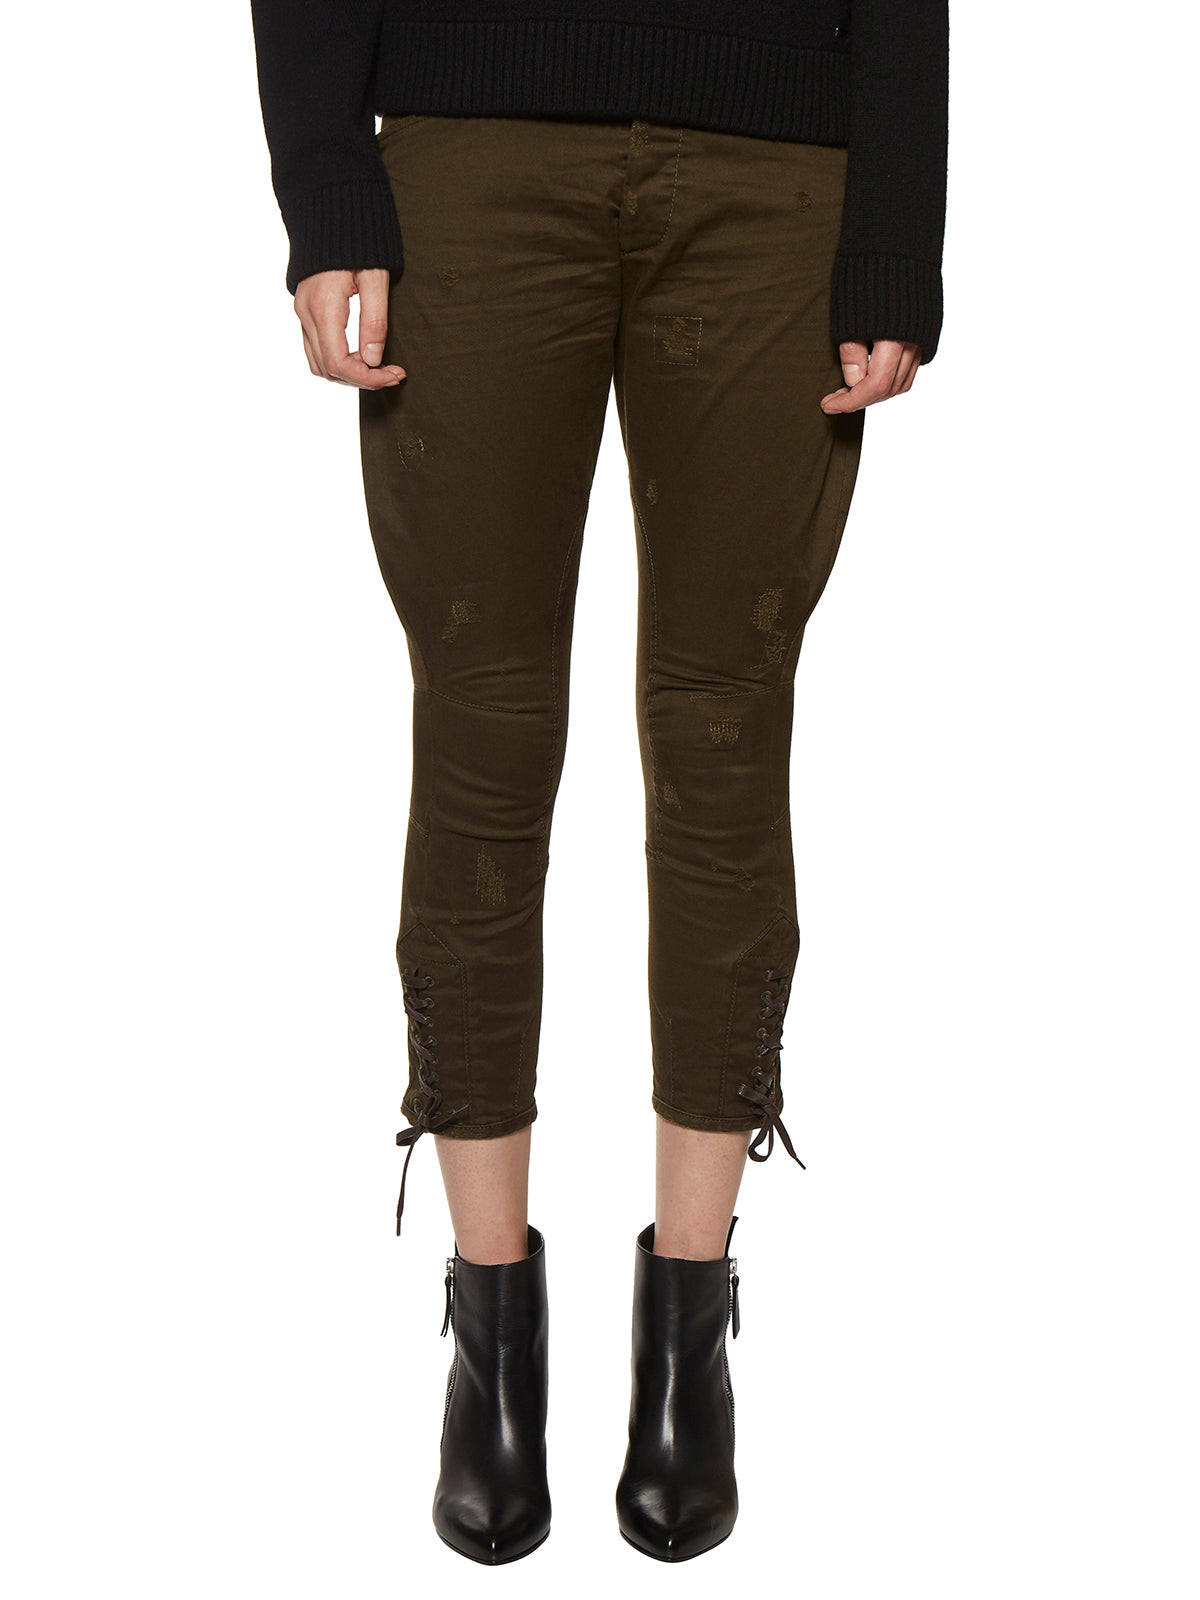 DSQUARED2 Green Cargo Cotton Trousers for Women